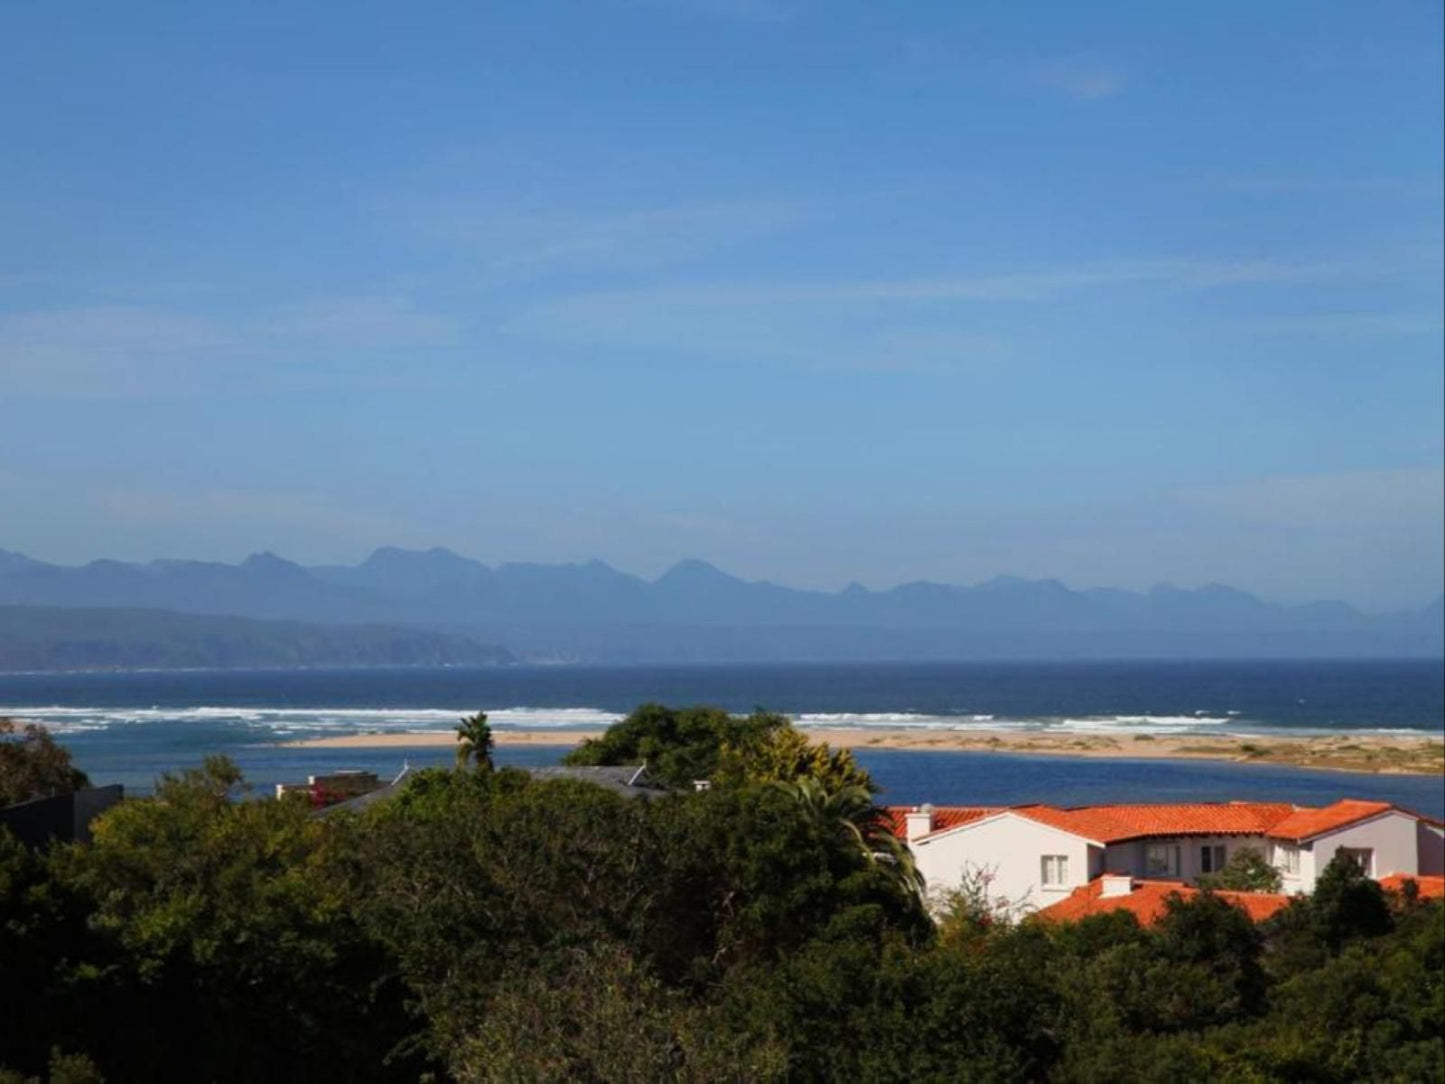 Sunrise Bay Self Catering Accommodation Plett Central Plettenberg Bay Western Cape South Africa Beach, Nature, Sand